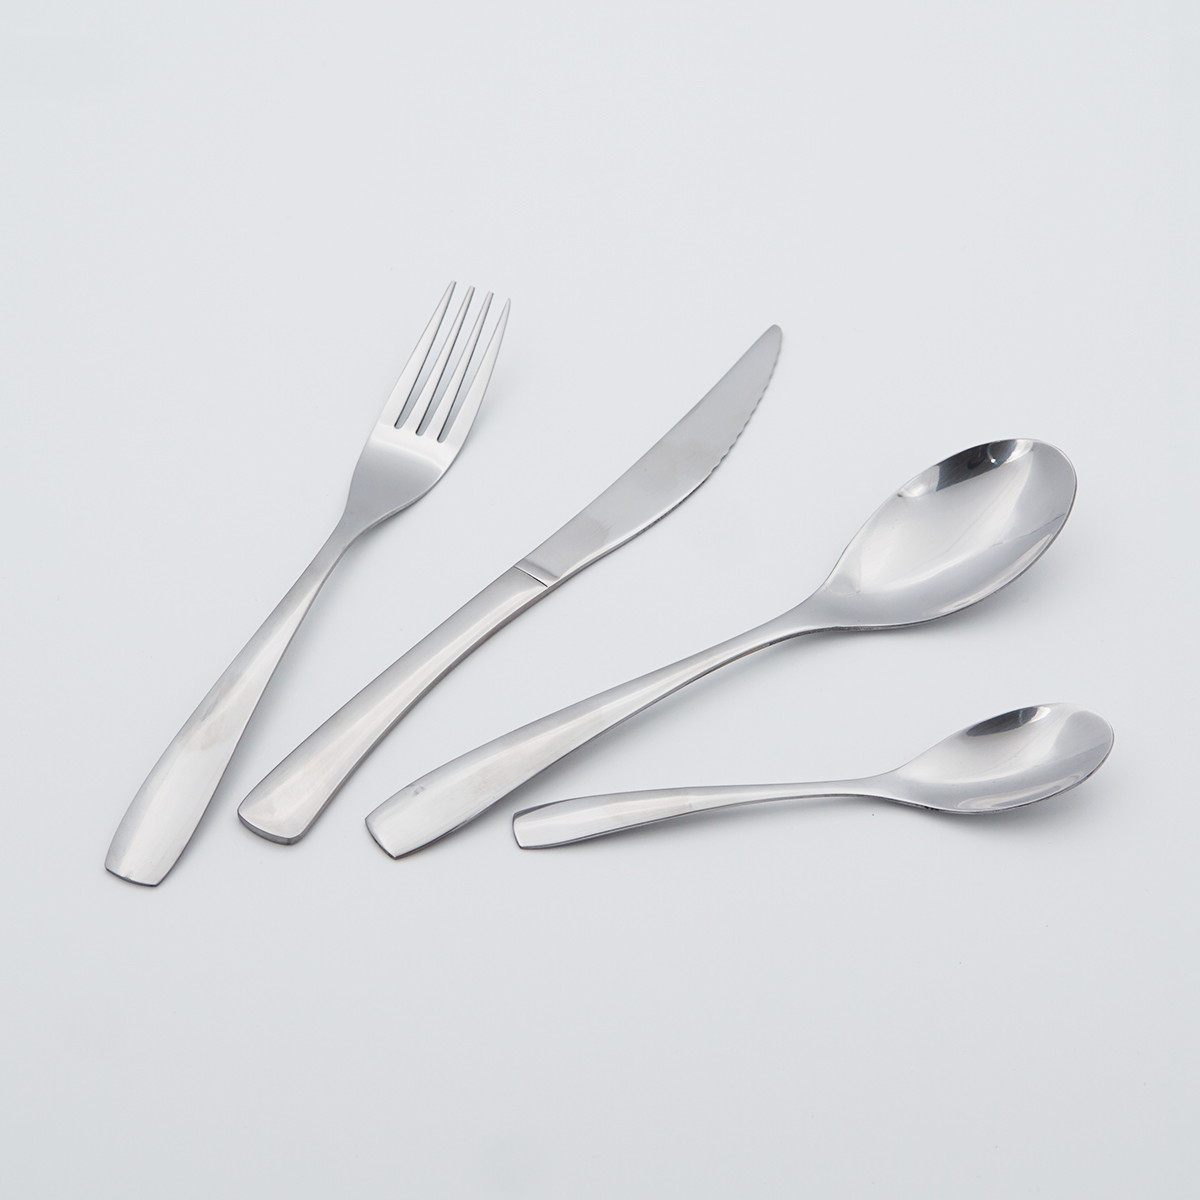 Factory Wholesale Good Quality Cheap Price Silverware Flatware Reusable Cutlery 18/8 Stainless Steel Cutelery Set